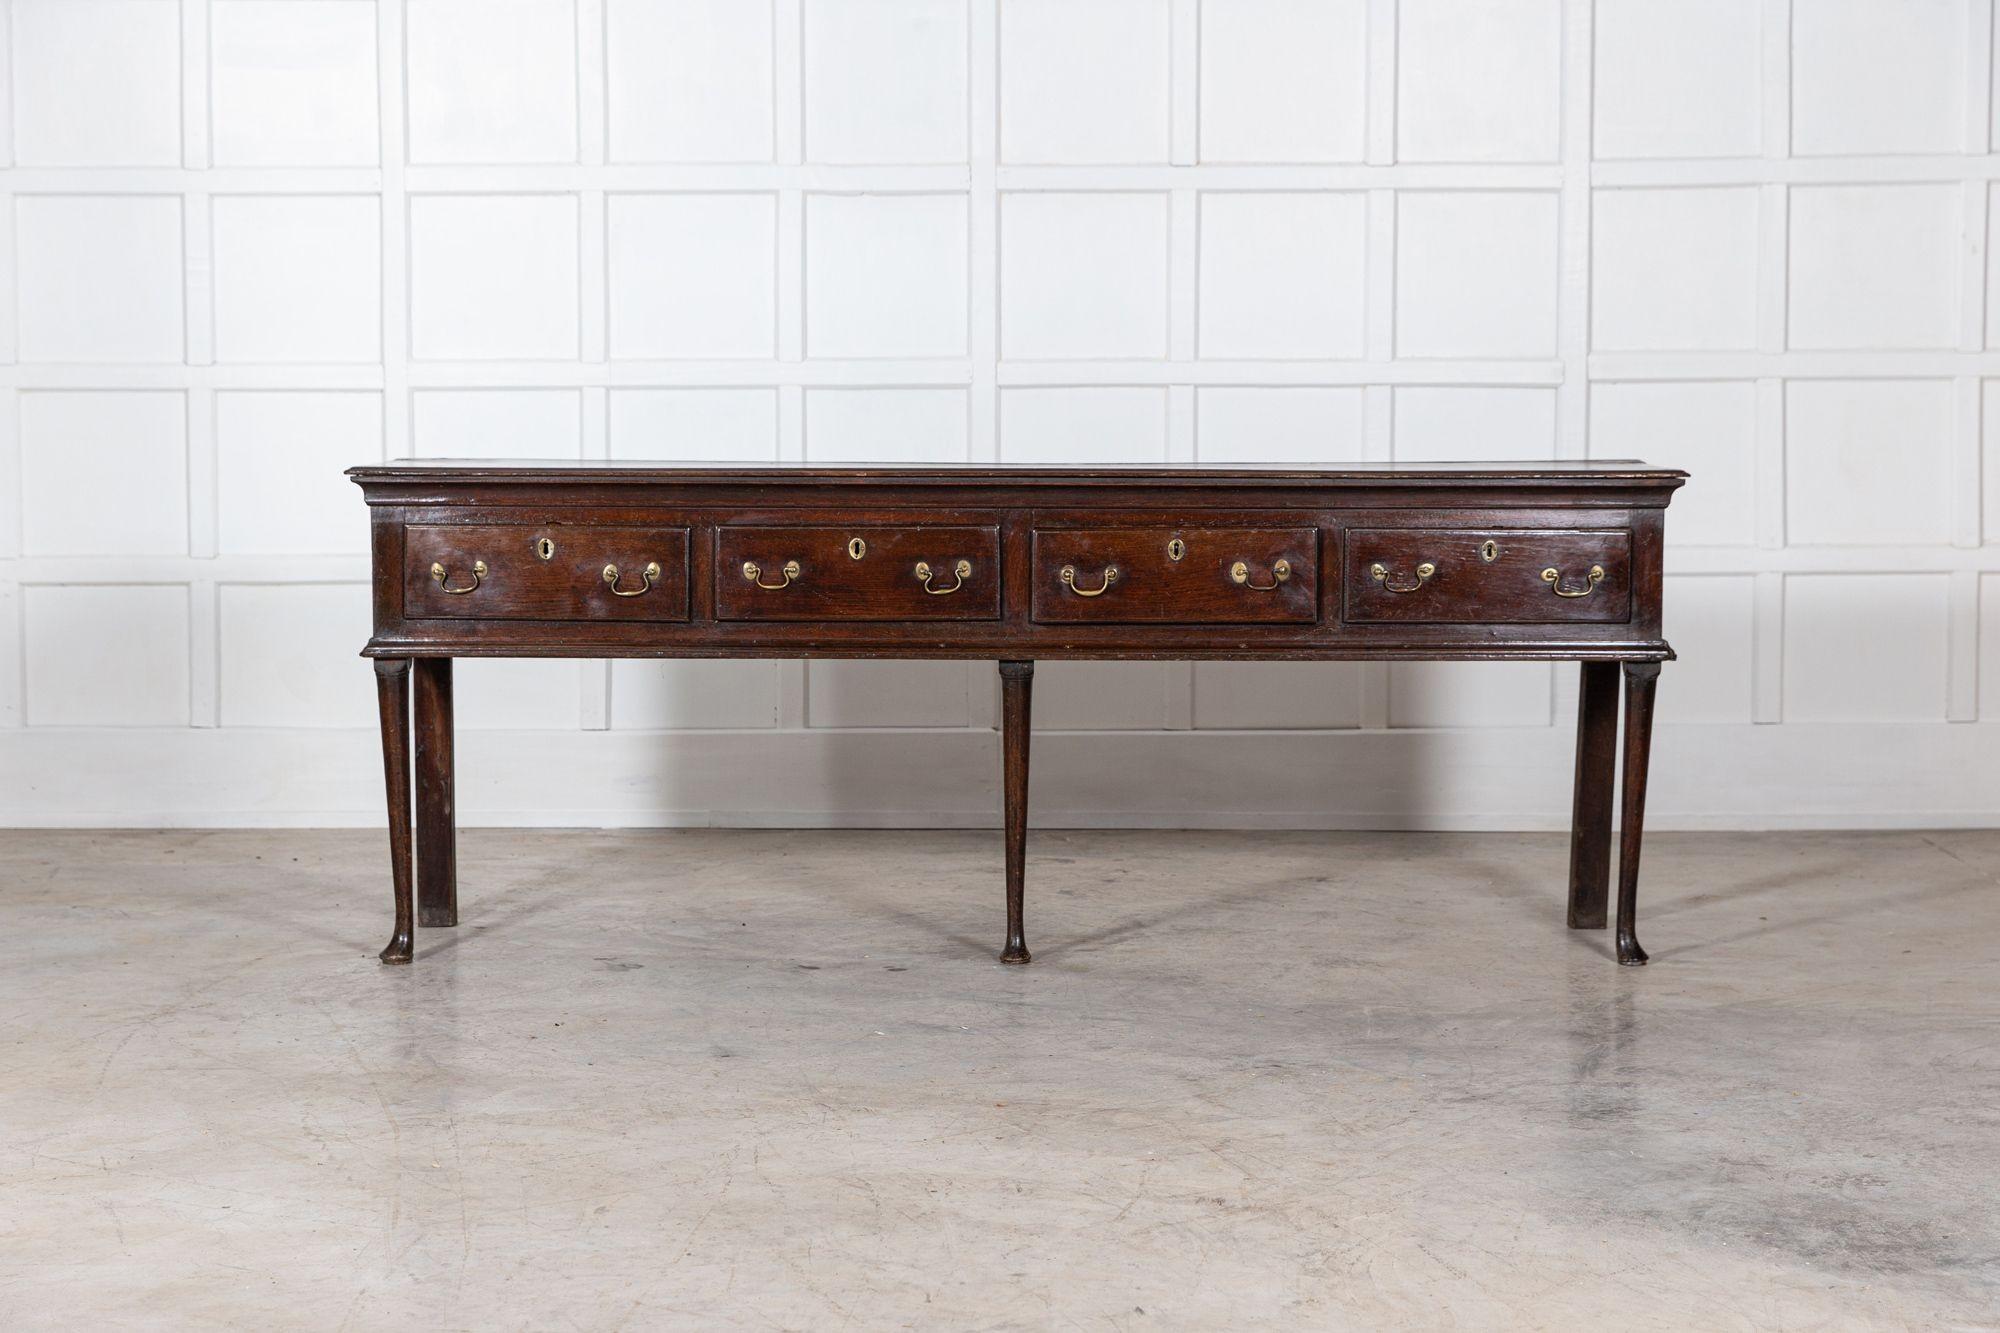 circa 1790
Large English George III Vernacular Oak Dresser Base

We can also customise existing pieces to suit your scheme/requirements. We have our own workshop, restorers and finishers. From adapting to finishing pieces including, stripping,